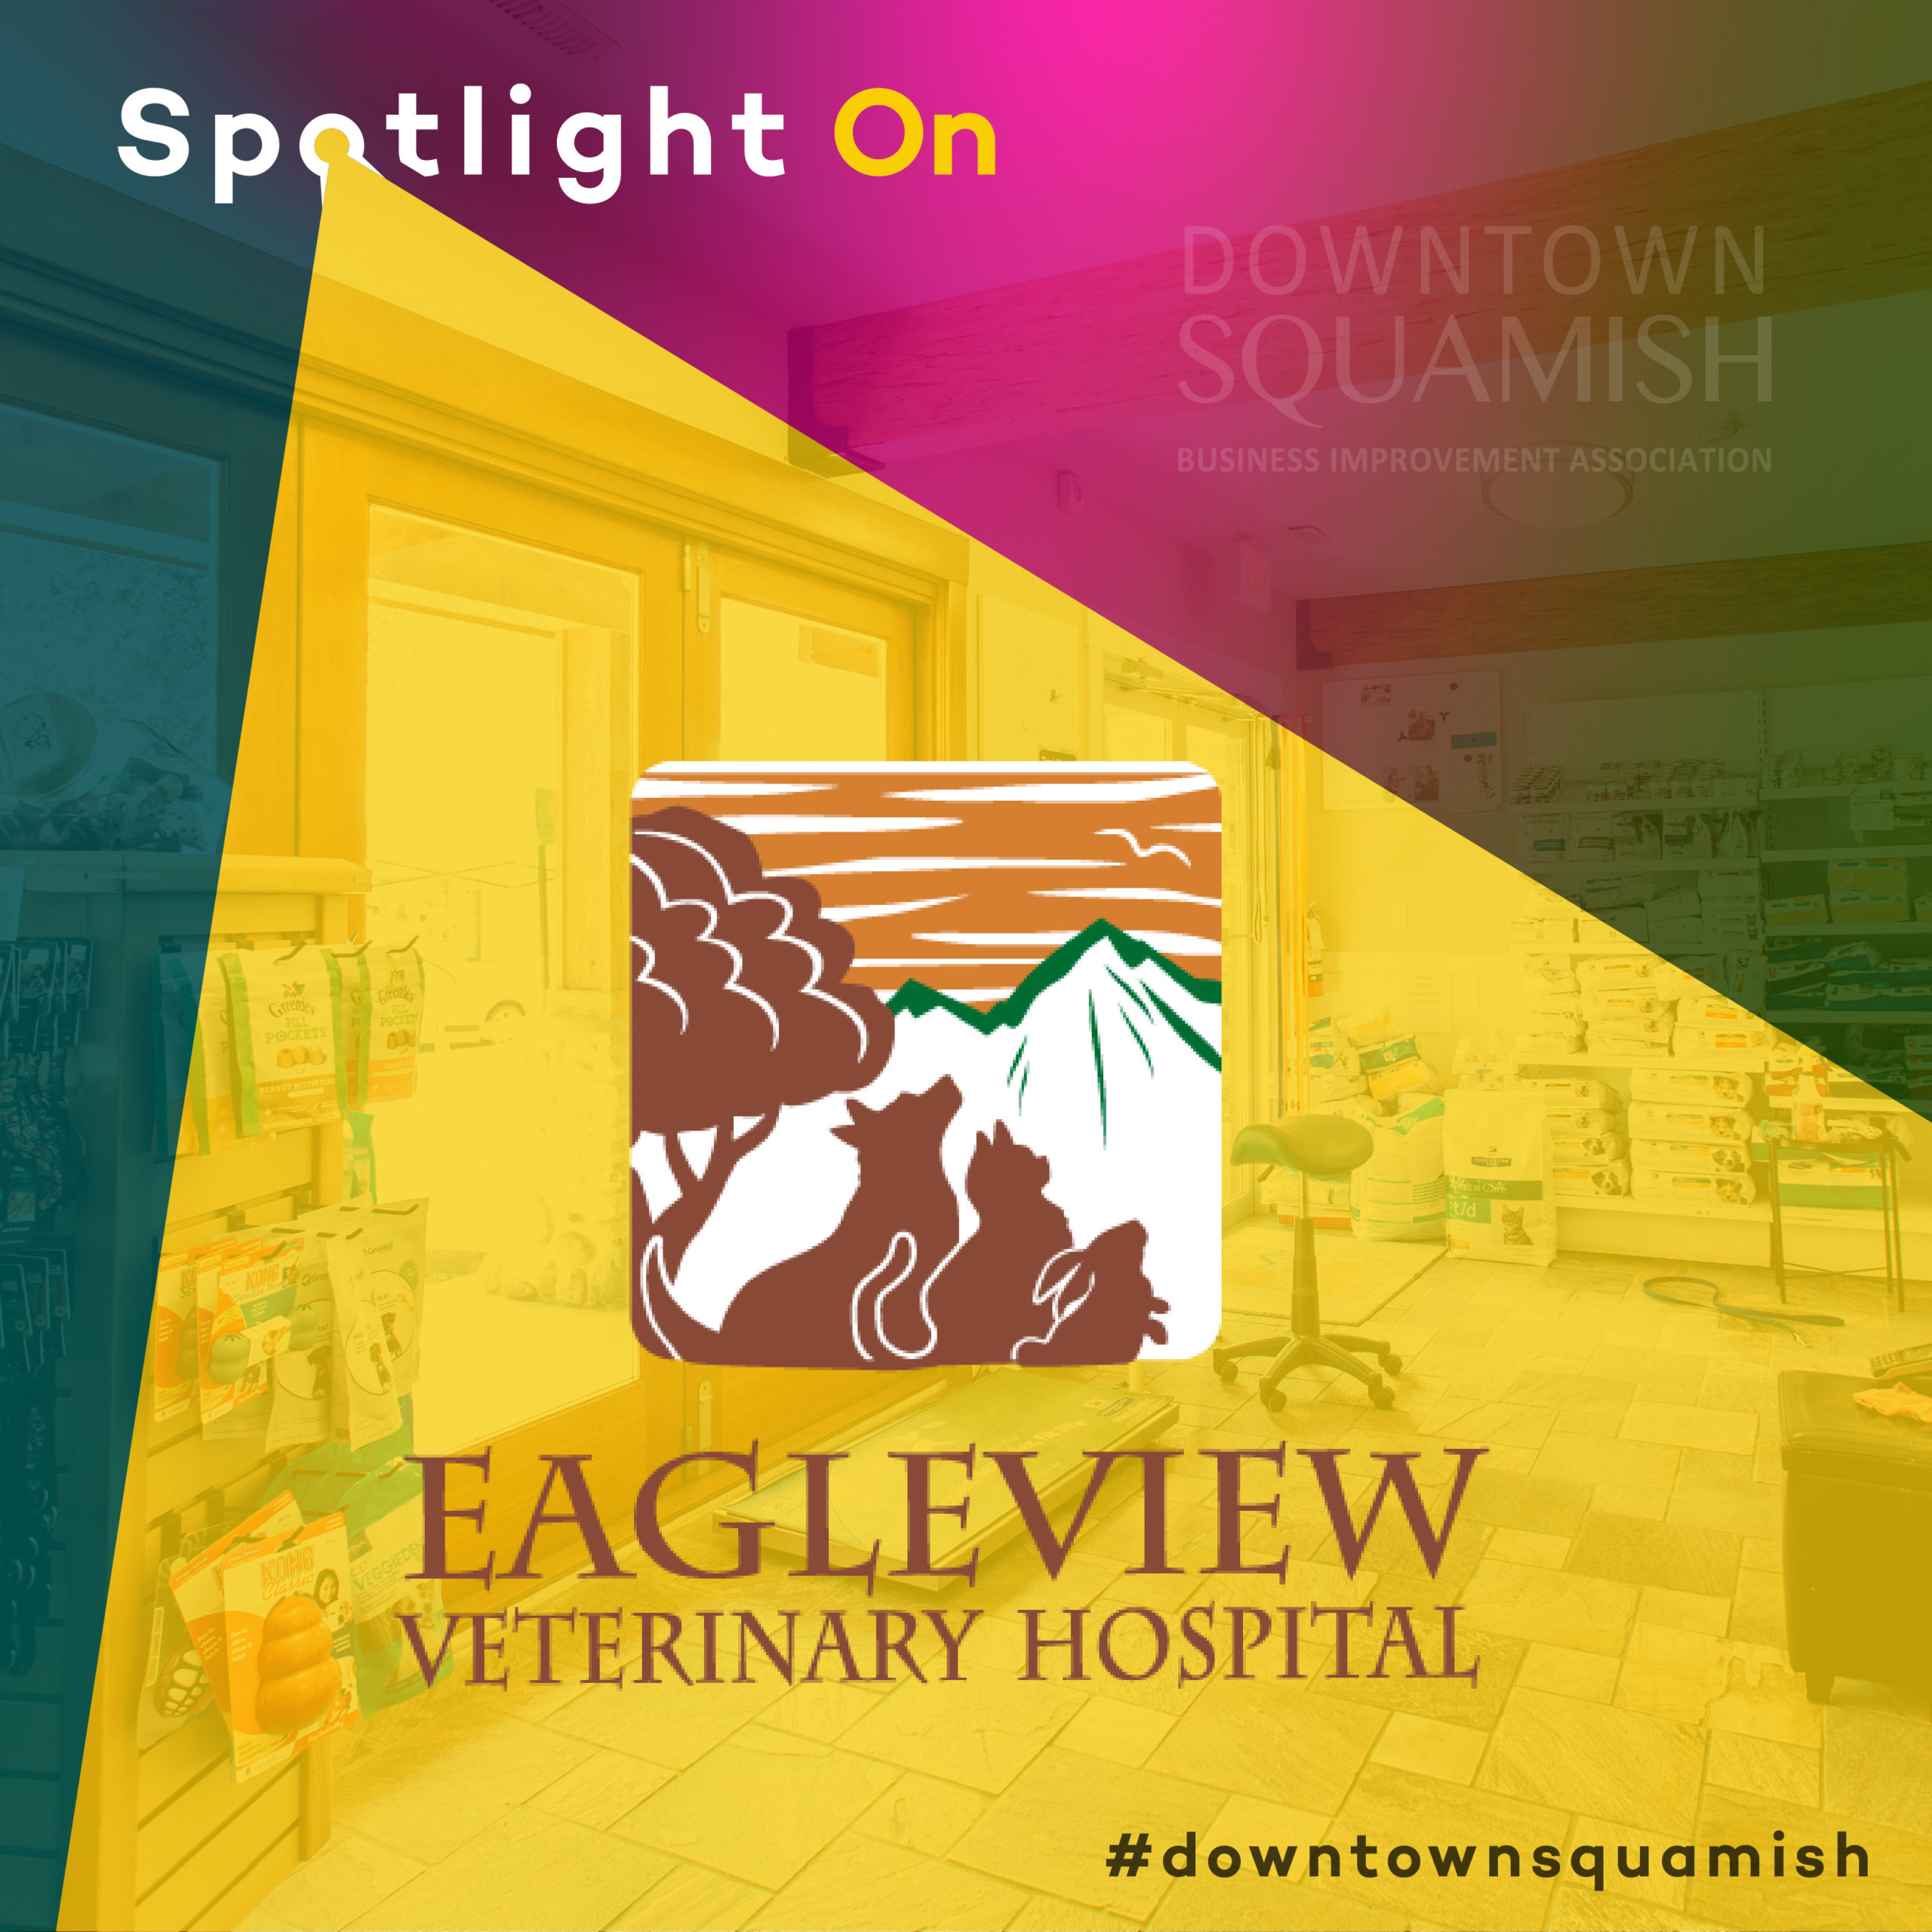 https://www.downtownsquamish.com/wp-content/uploads/2020/08/Spotlight_On_EAGLEVIEW-scaled.jpg